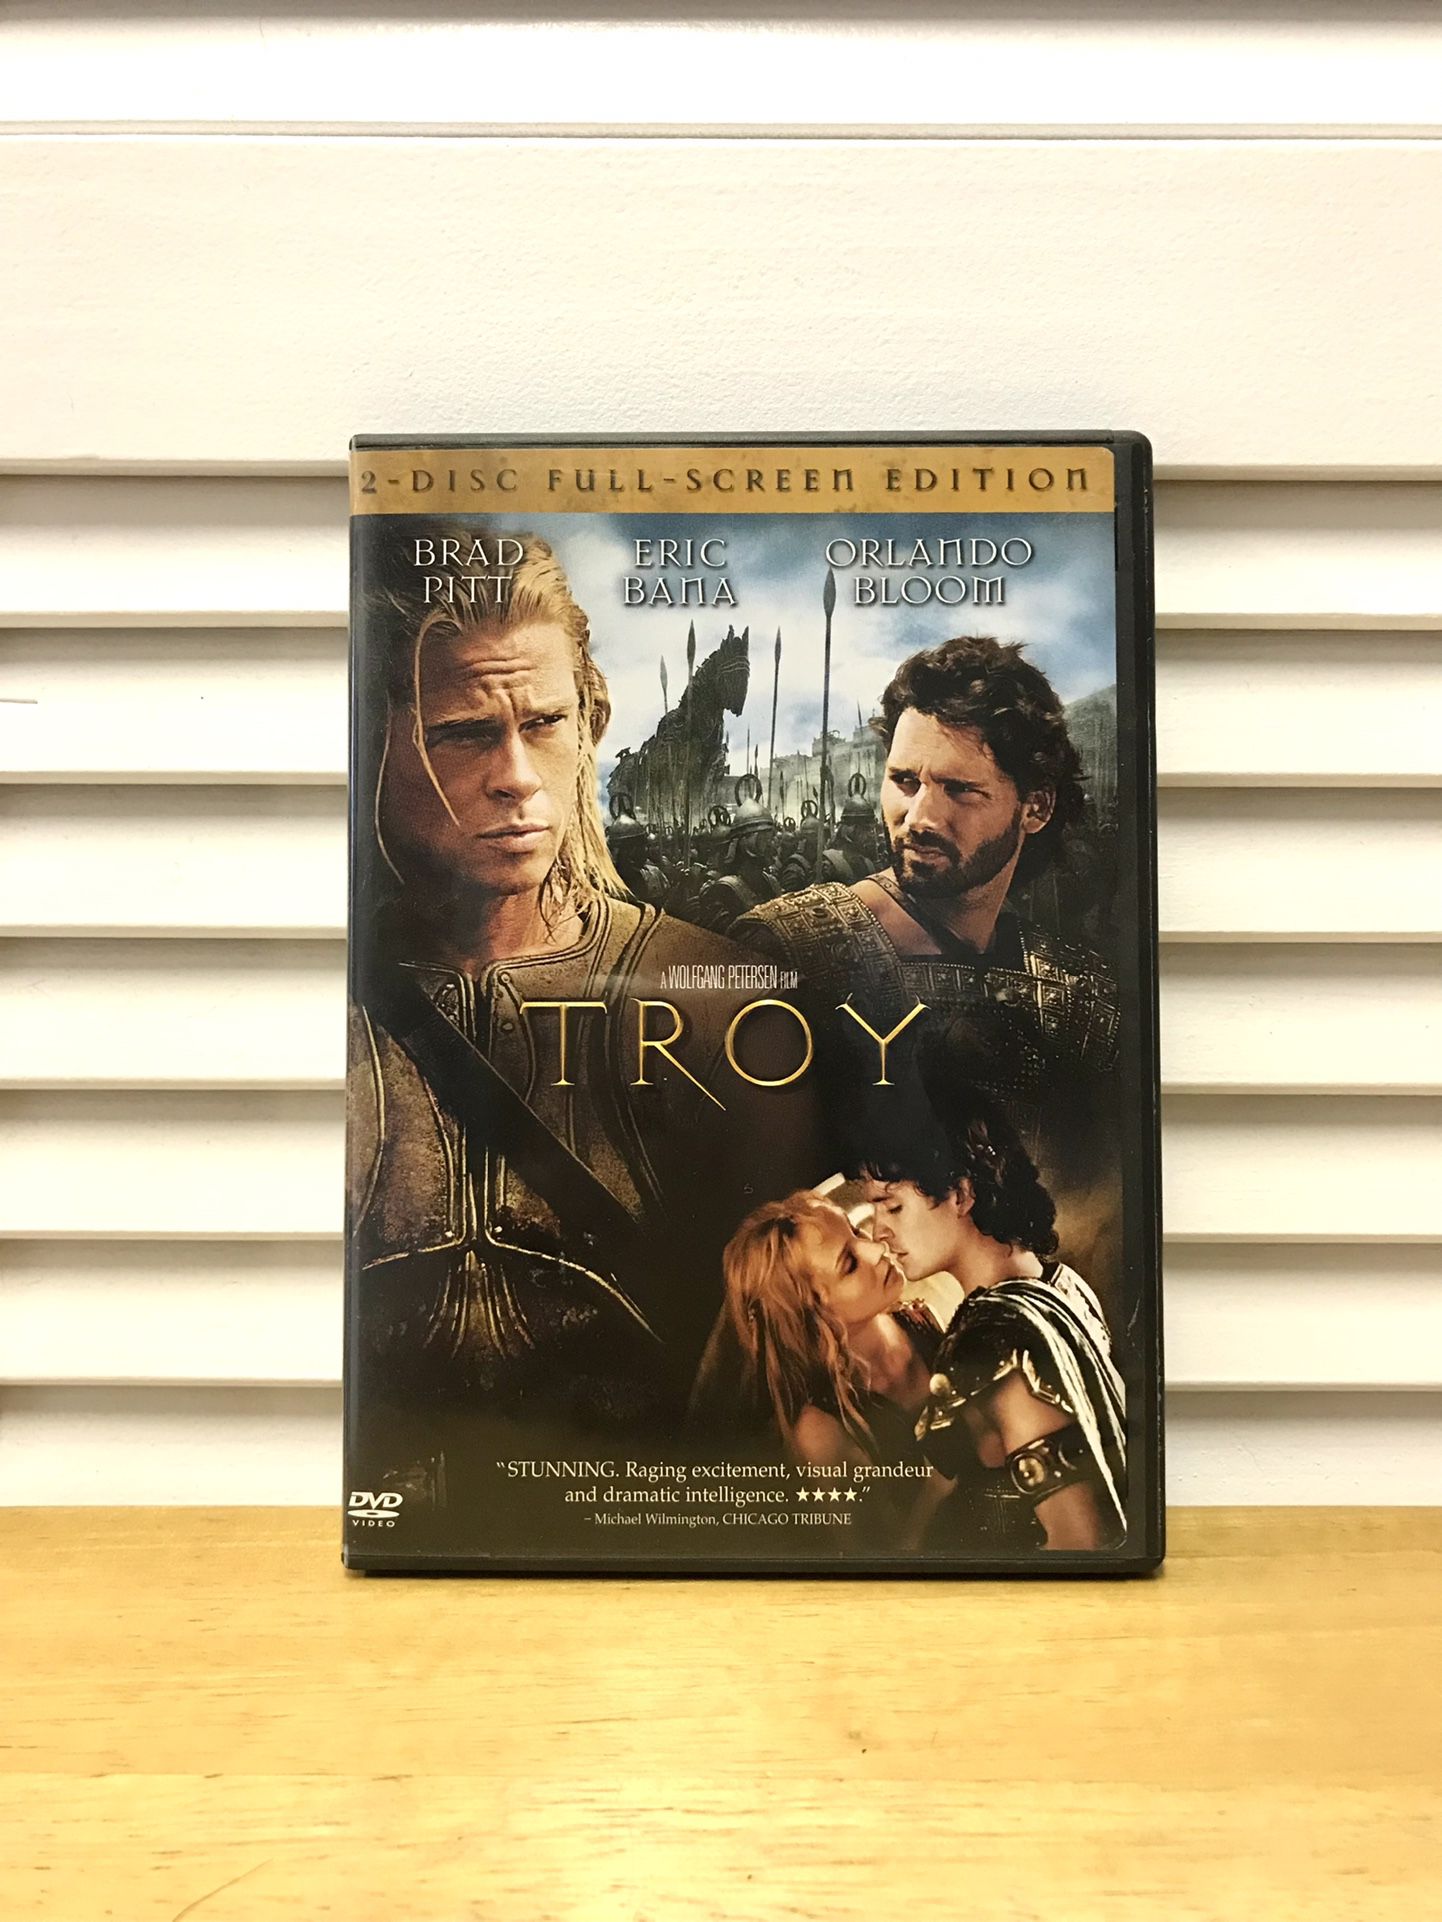 2-Disc Full-Screen Edition Troy DVD W/Special Features